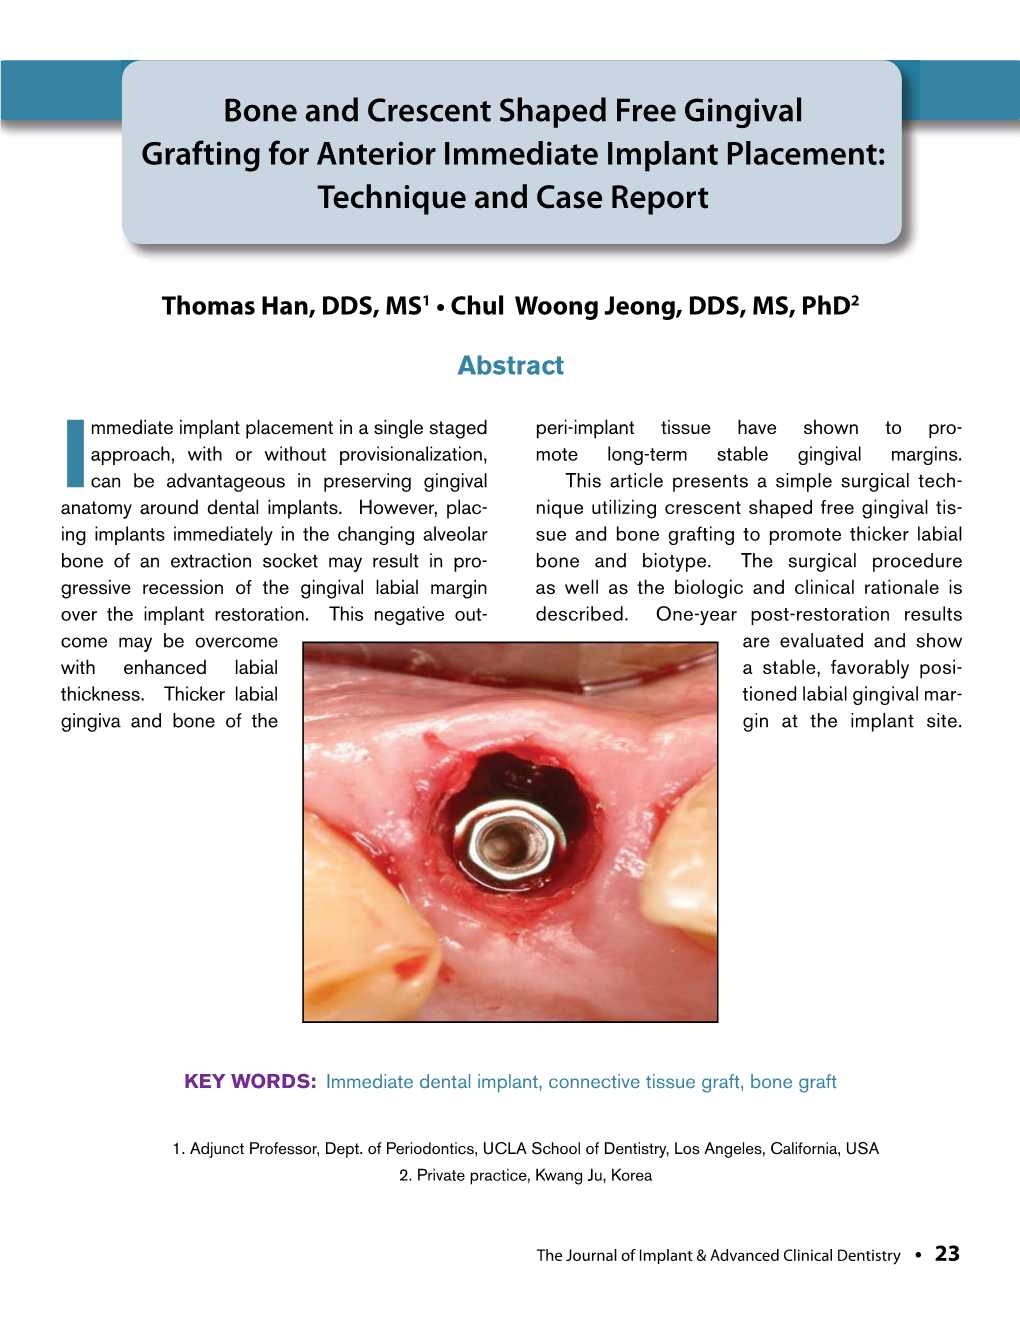 Bone and Crescent Shaped Free Gingival Grafting for Anterior Immediate Implant Placement: Technique and Case Report